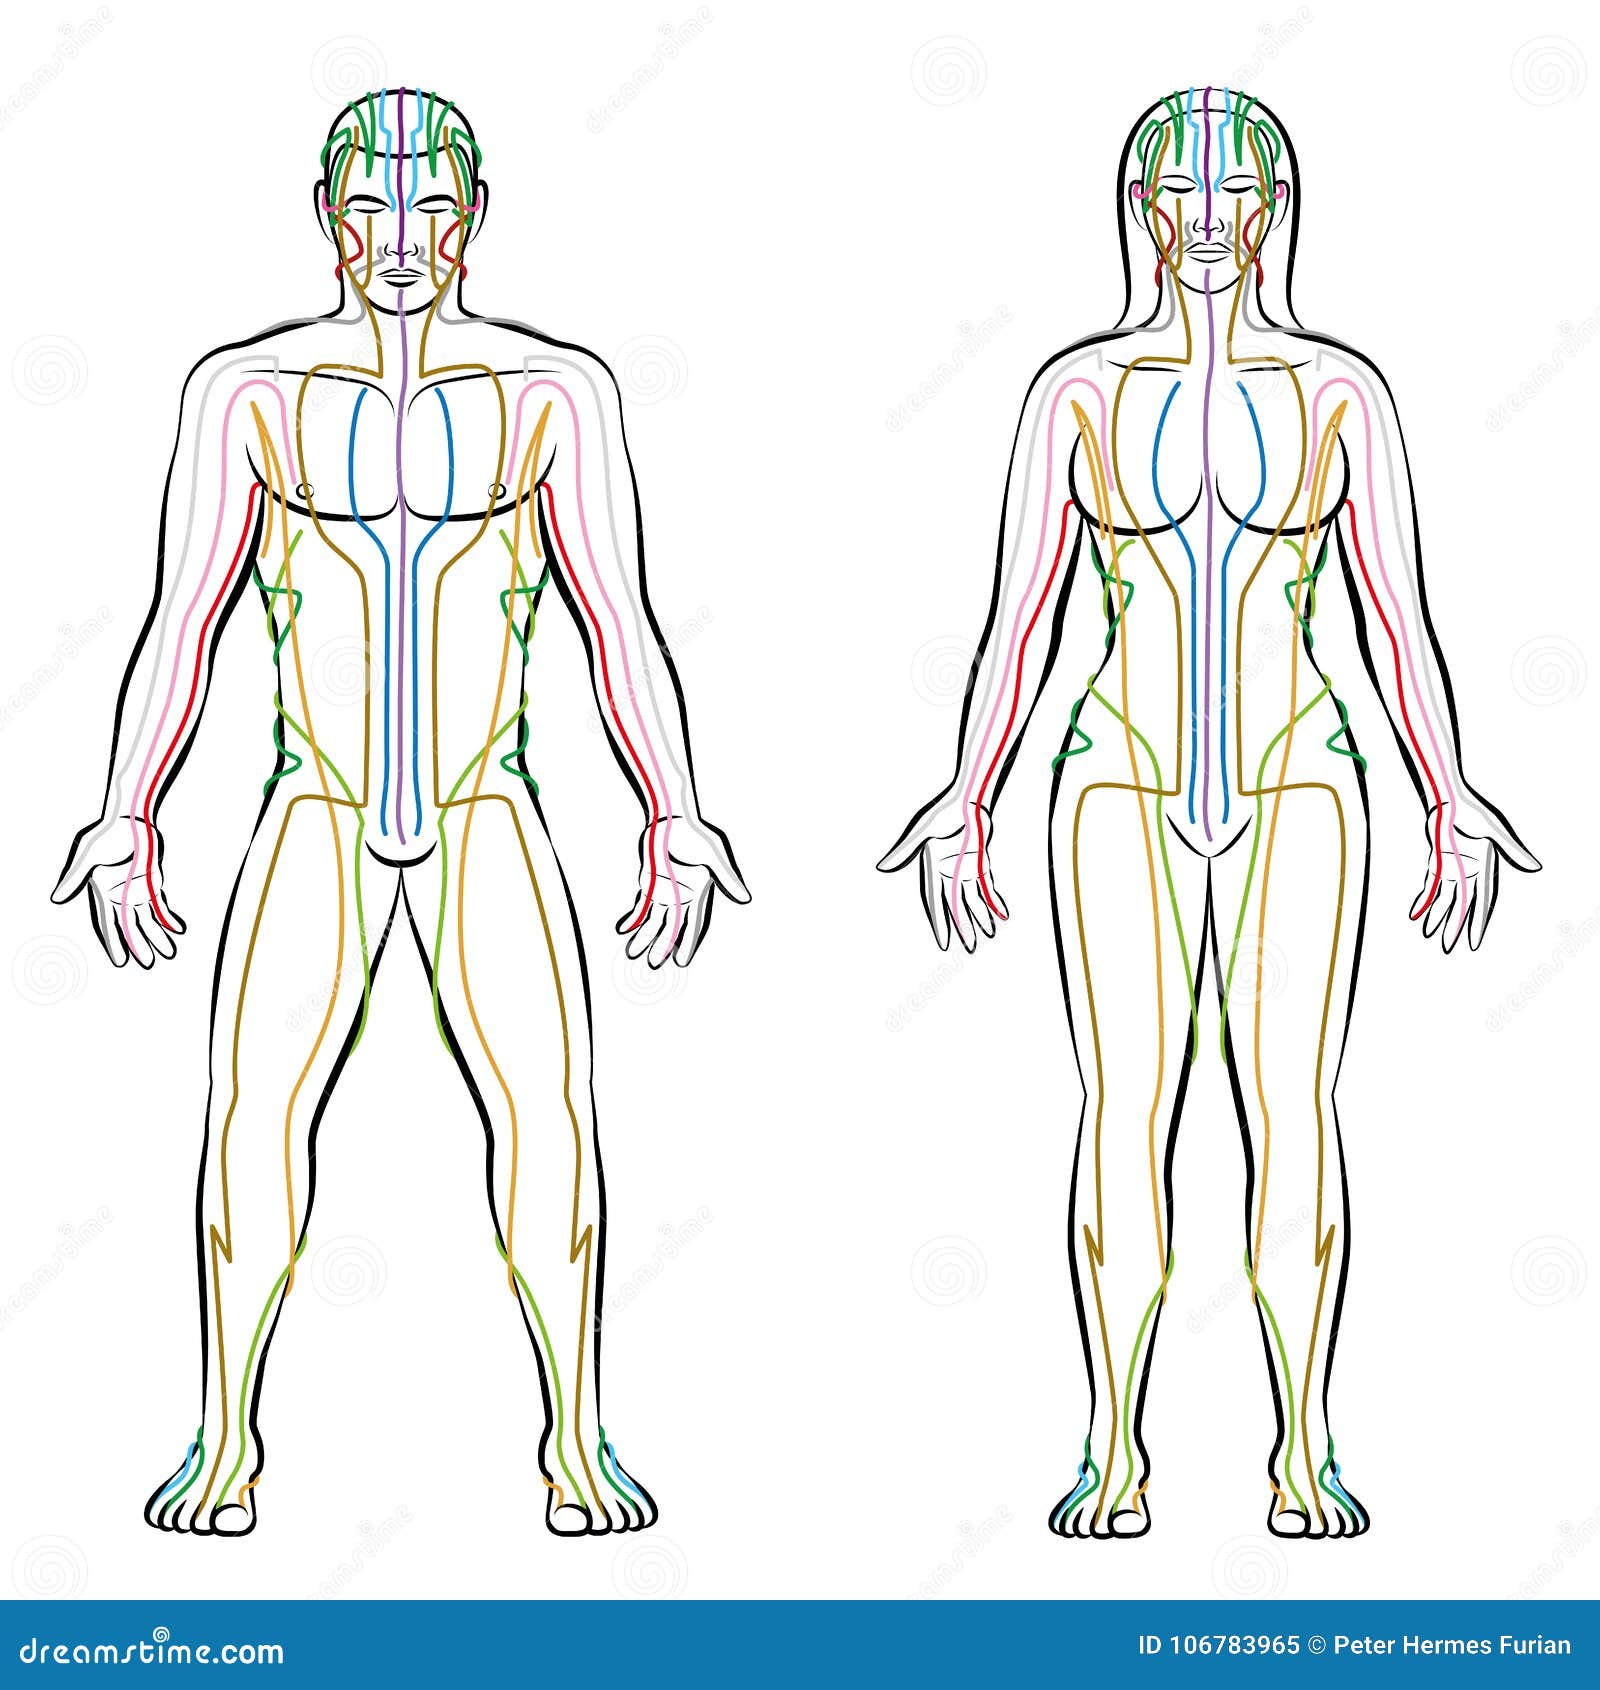 meridian system male female body colored meridians